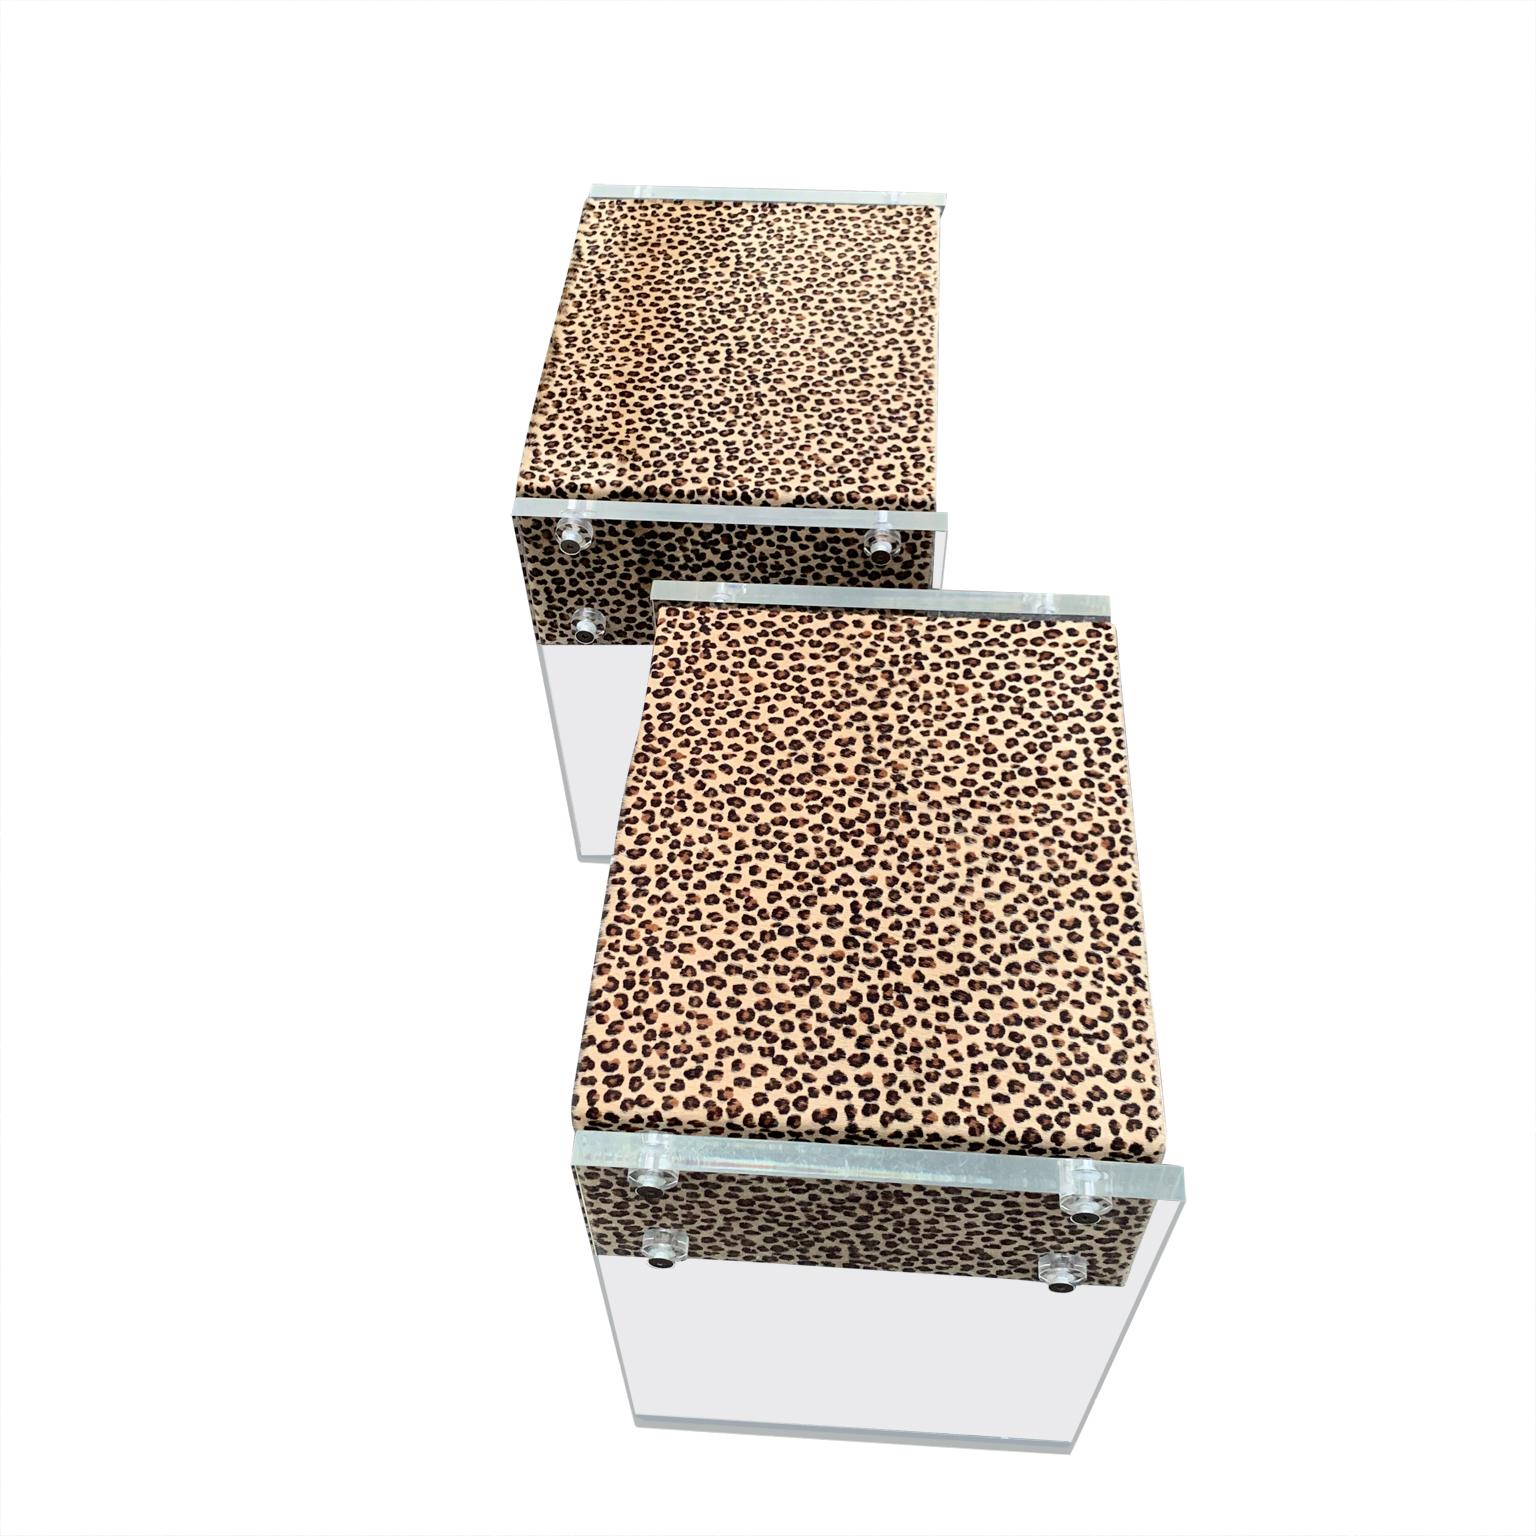 Pair of Faux Cheetah Skin Upholstered Nightstands with Lucite Side Panels (Handgefertigt)